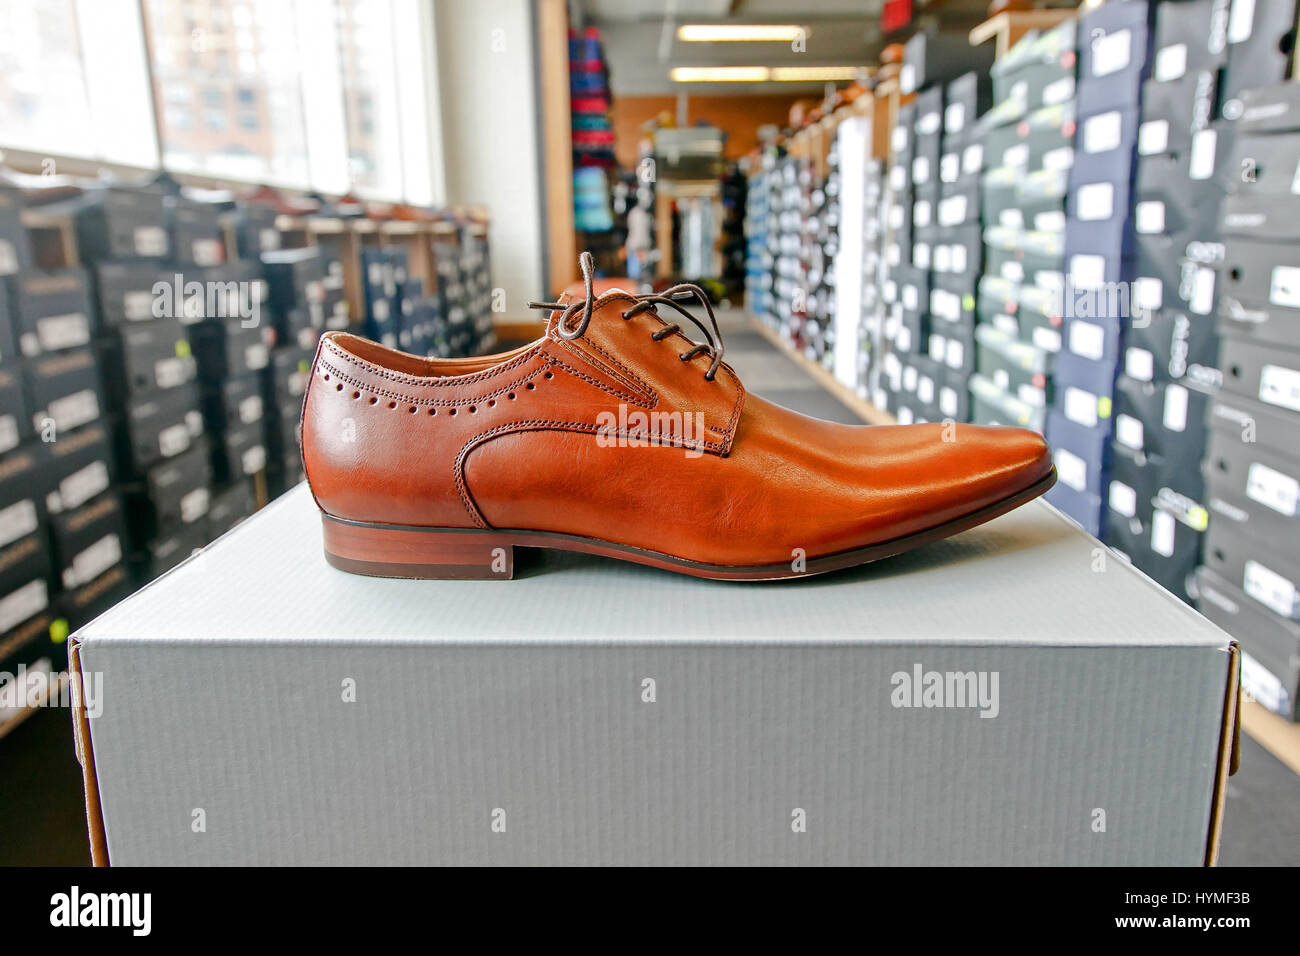 Mens dress shoe in a shoe store with stacks of boxes in the background. Stock Photo